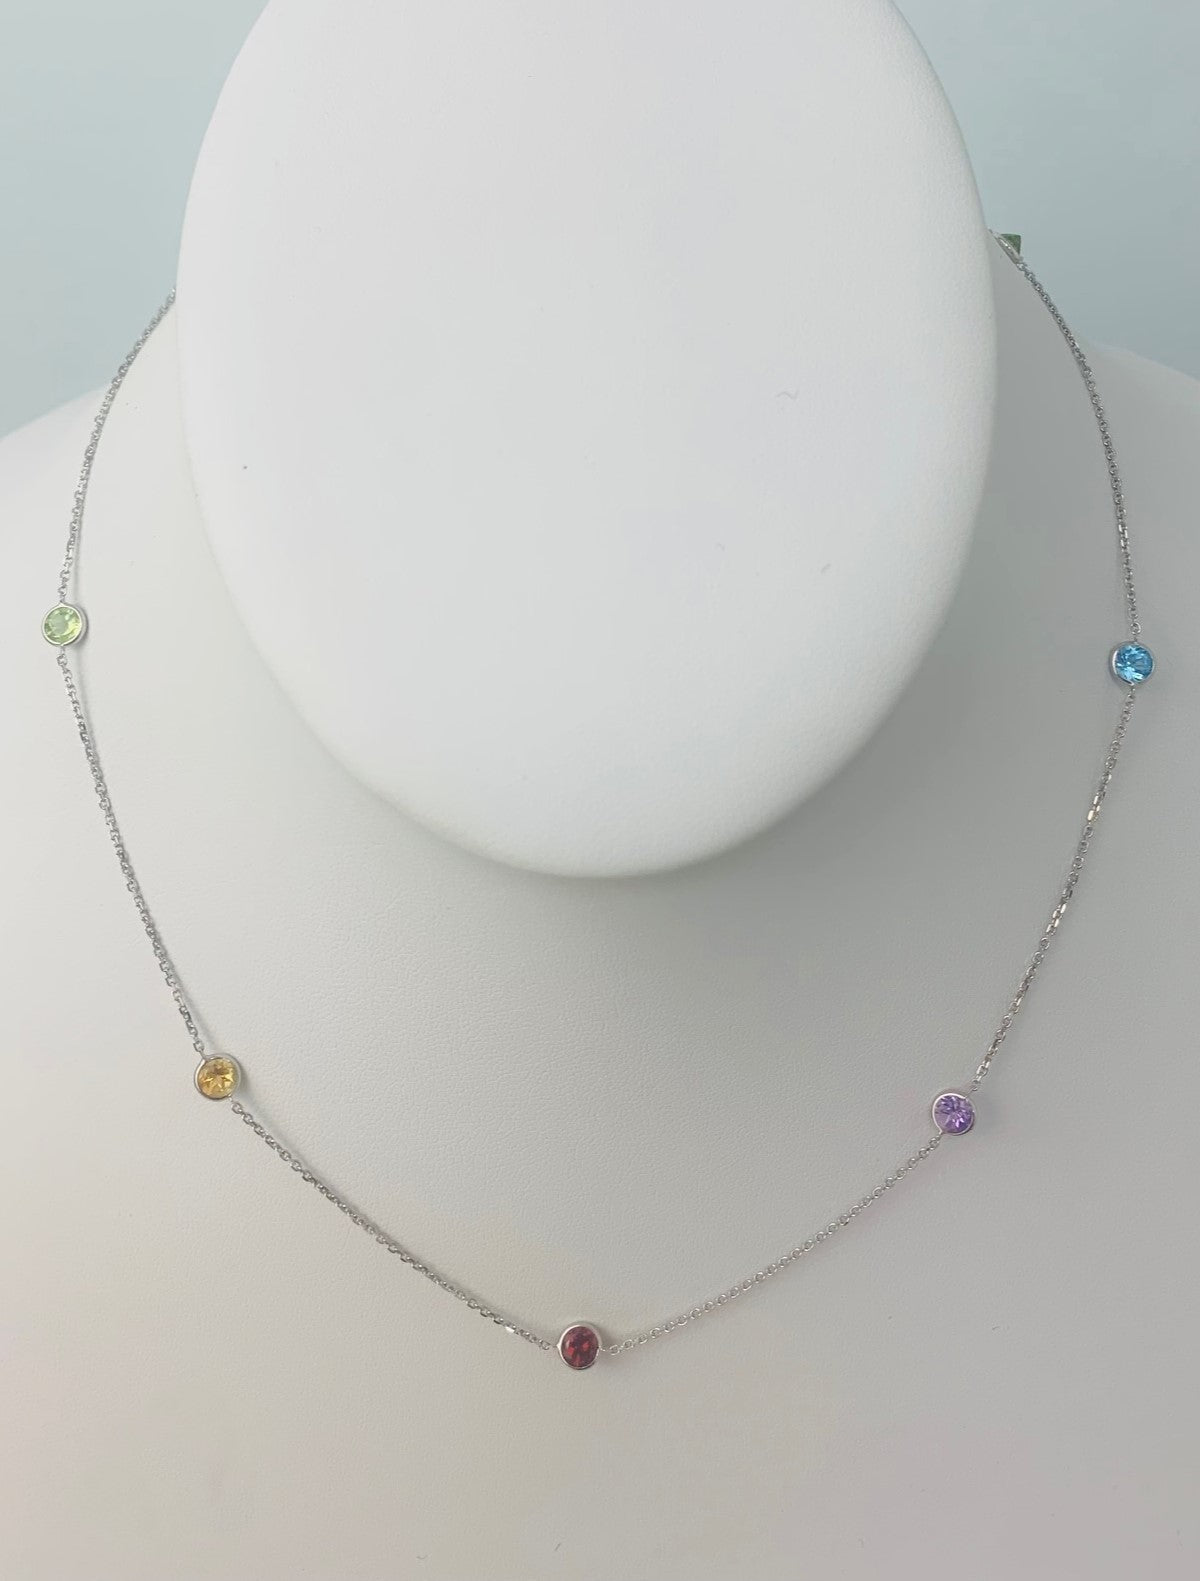 16" 4mm 7 Station Round Multicolored Bezel Necklace in 14KW - NCK-167-BZGM14W-MLTI-16-4